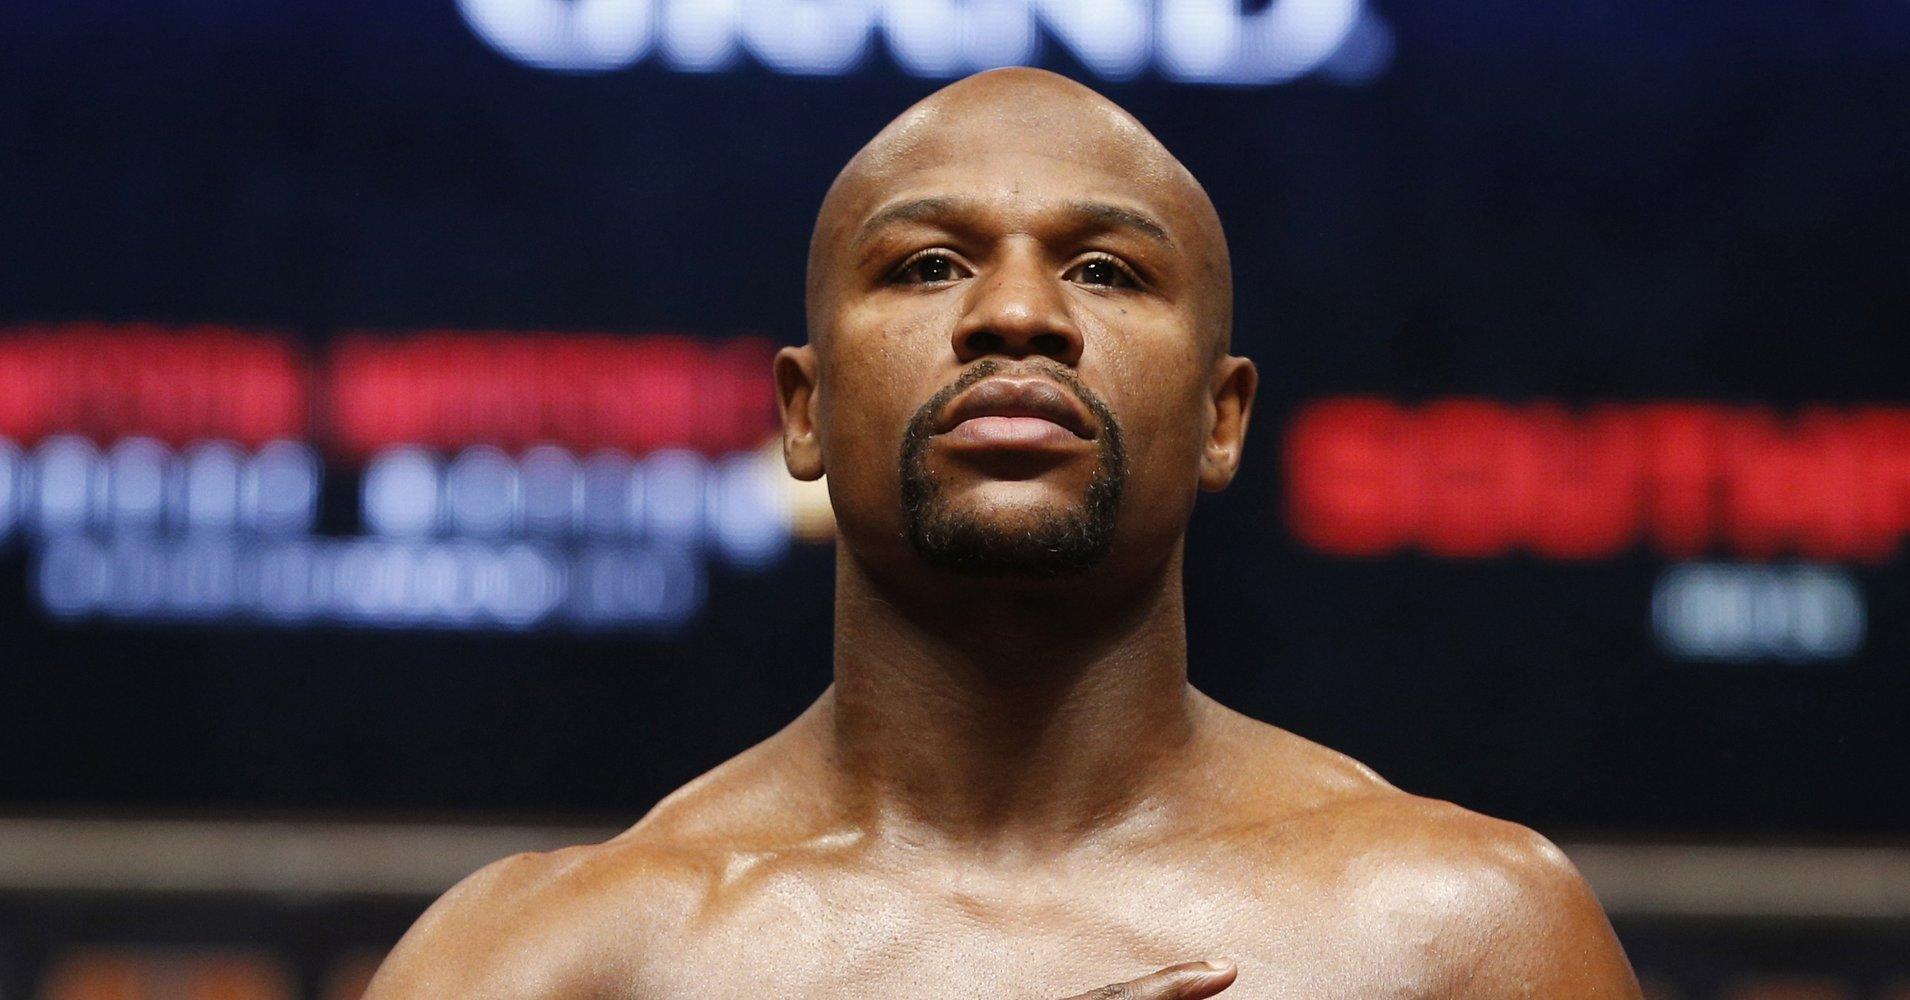 Floyd Mayweather Jr. Wallpaper Image Photo Picture